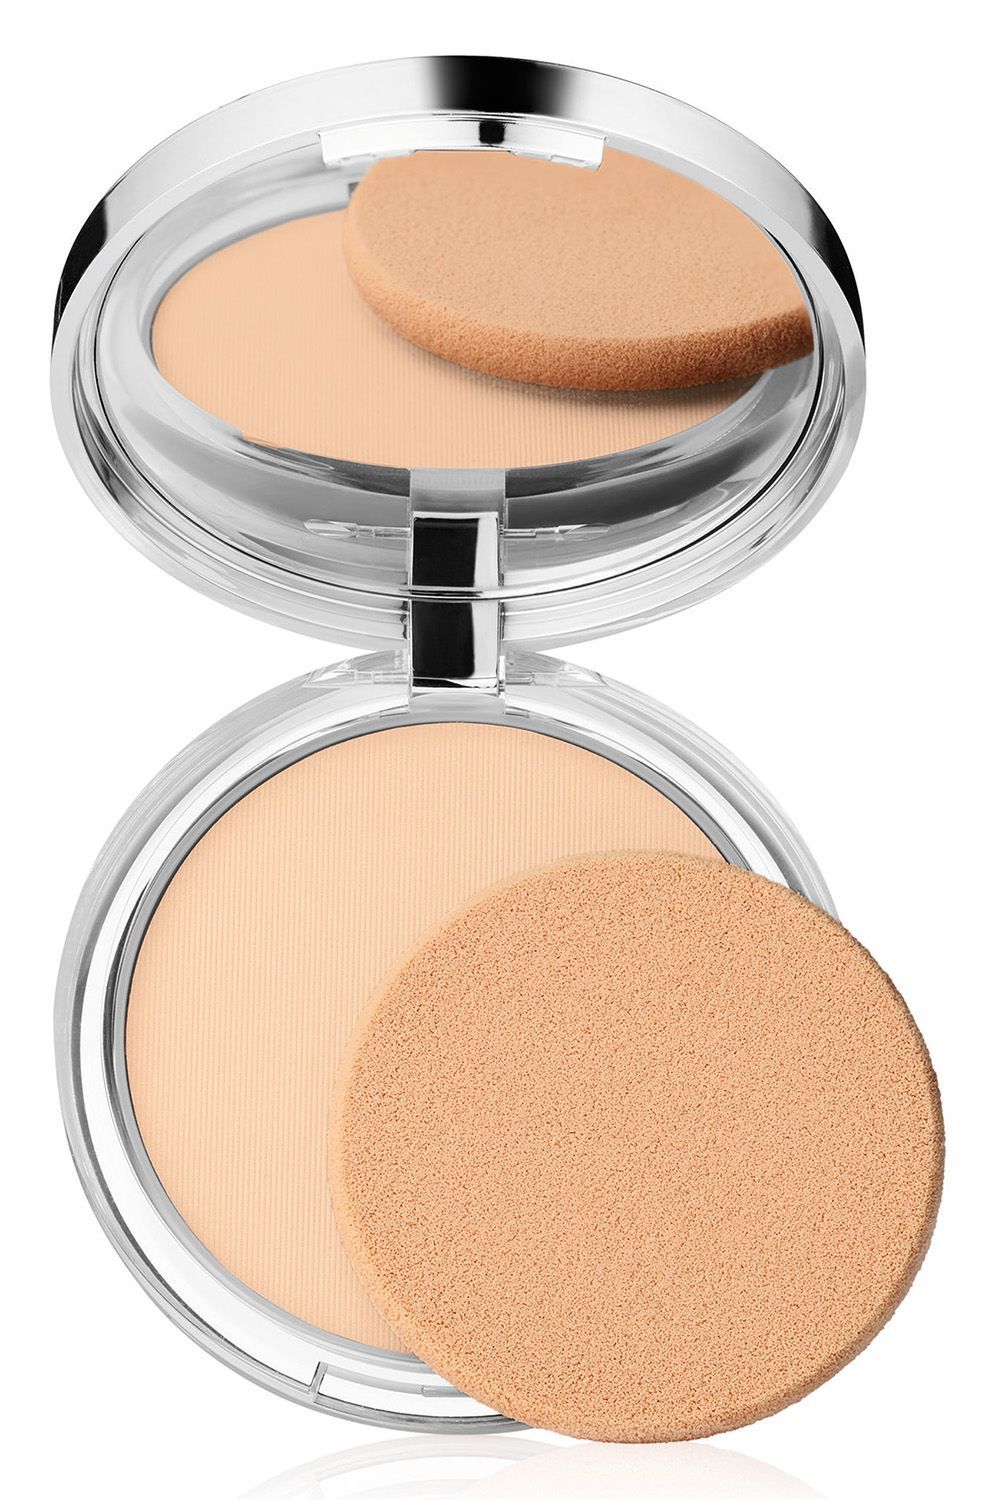 top powders for oily skin